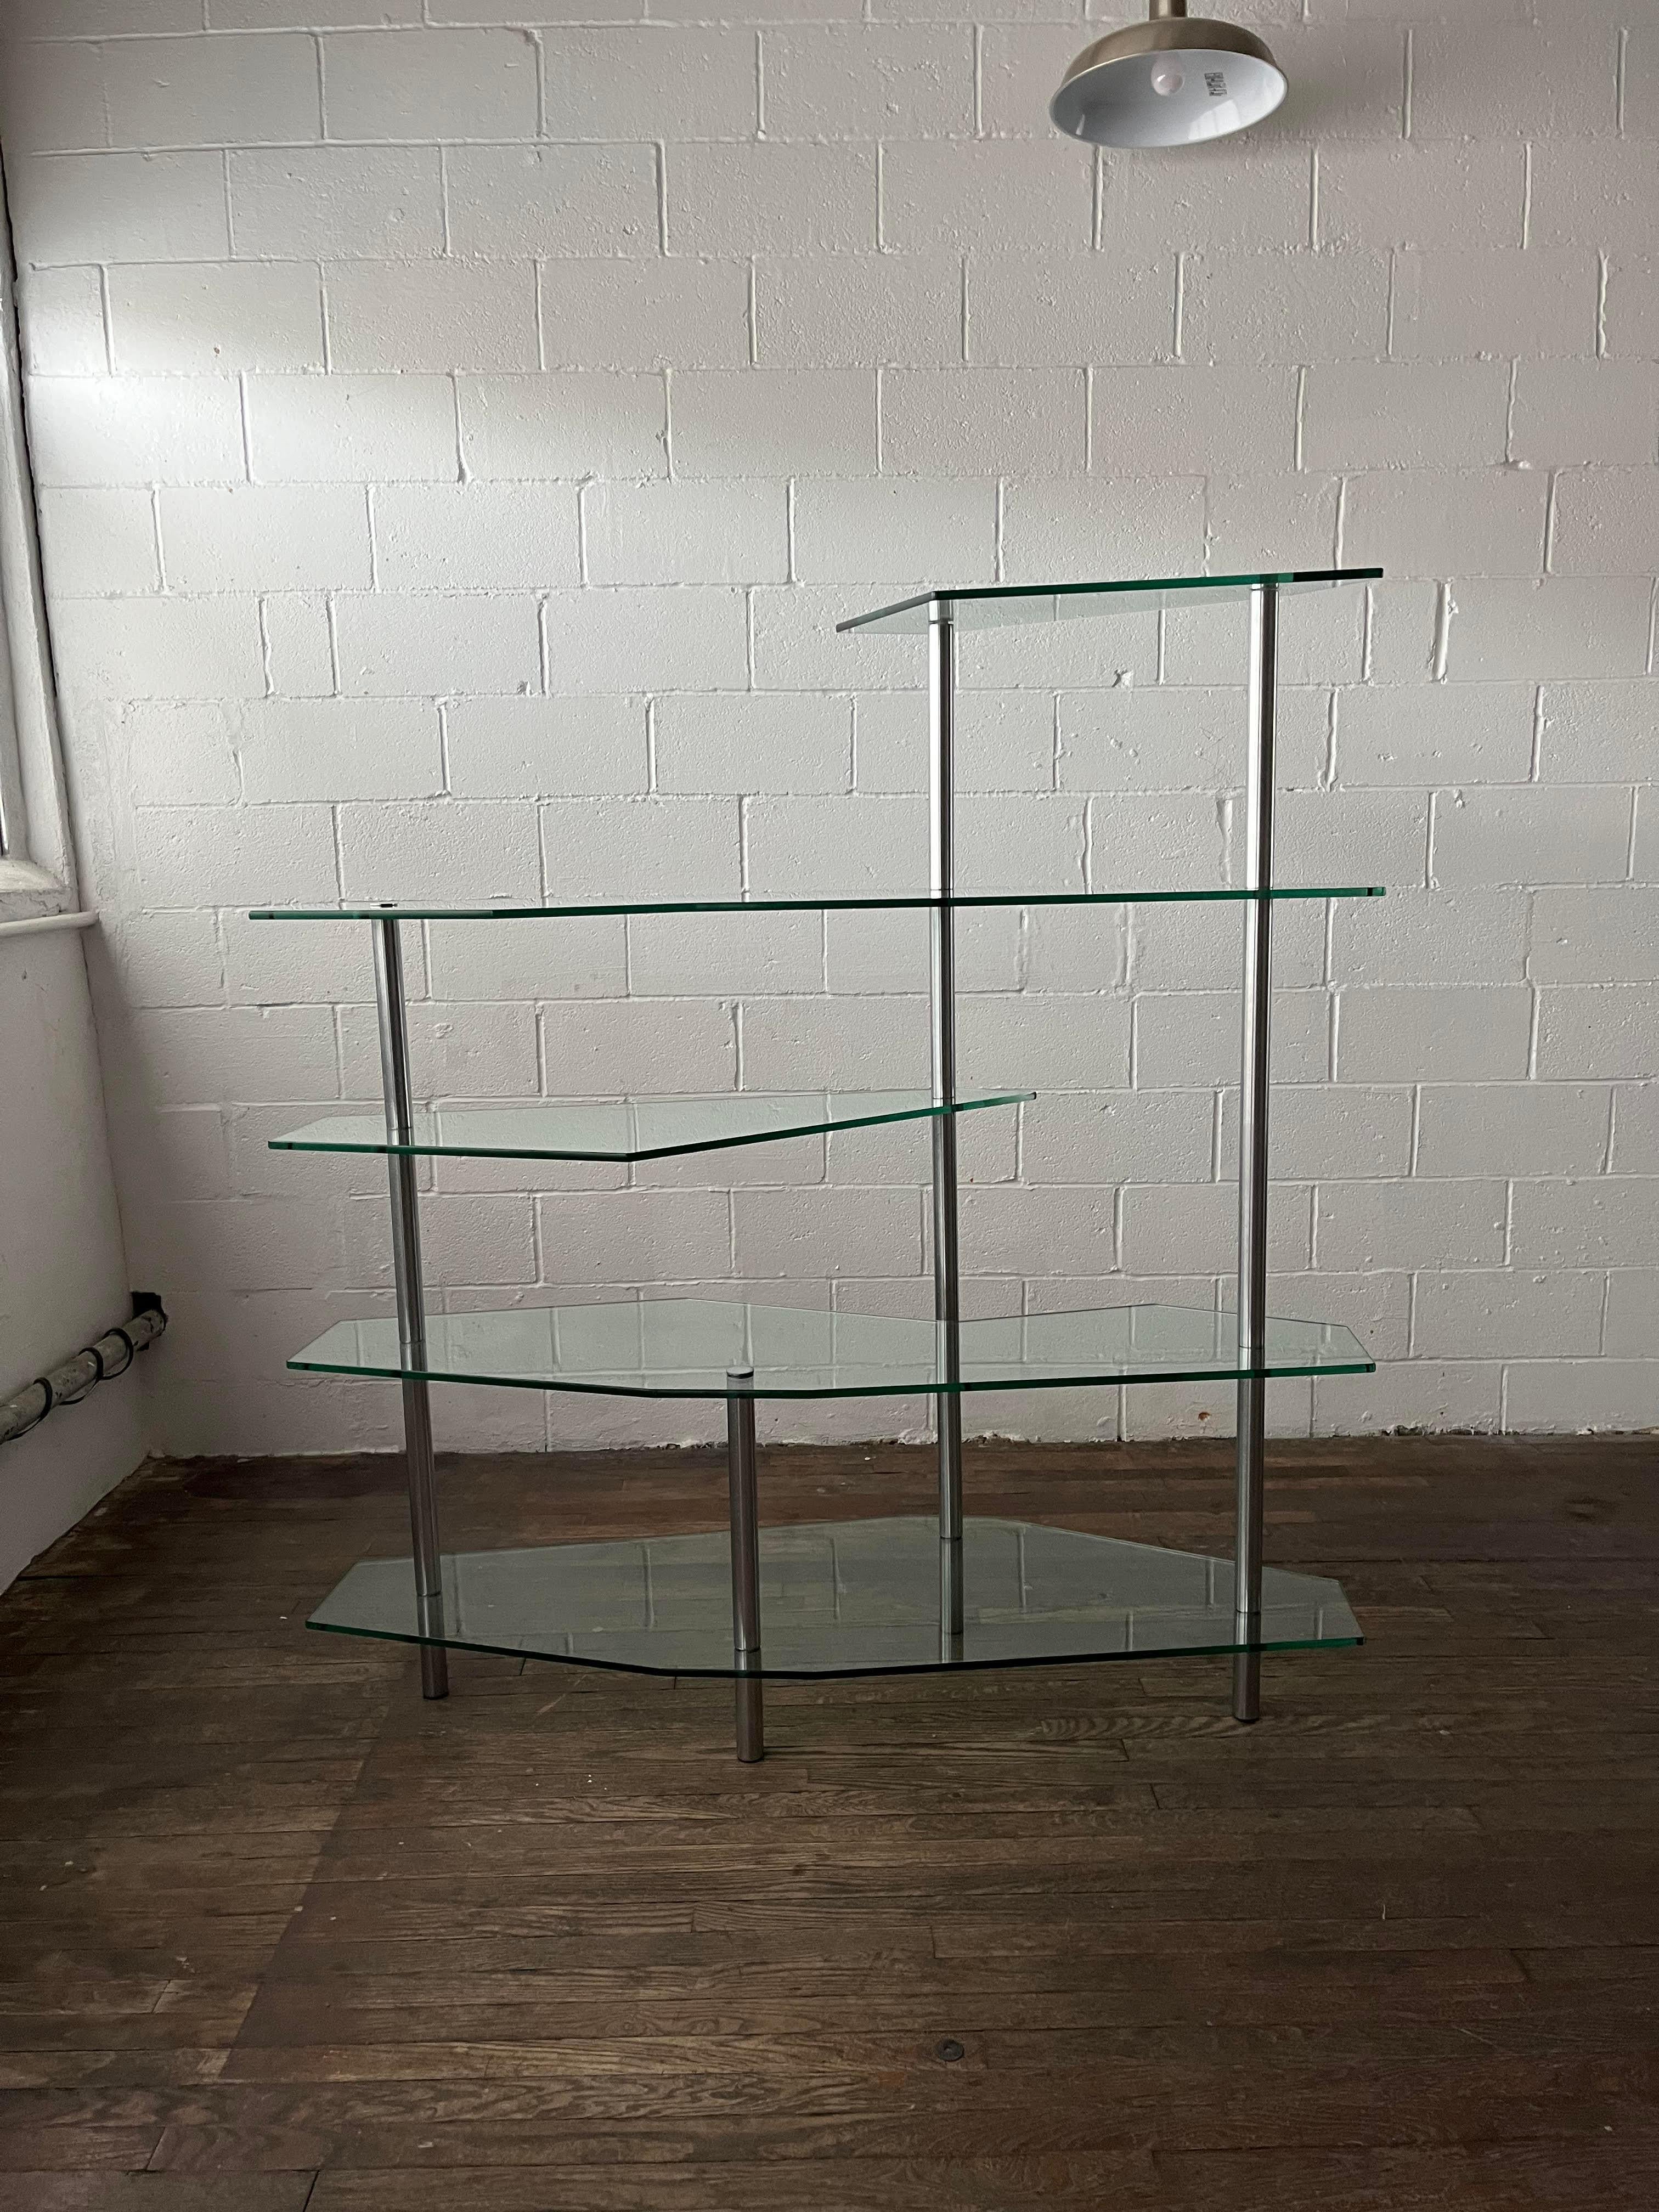 A modern yet elegant steel and glass etagere. Brushed steel frame hols unique freeform glass shelves to create a sophisticated and modern look. Thick glass shelves in varying shapes to keep the eye moving.
Will be dismantled for shipping. 

Curbside